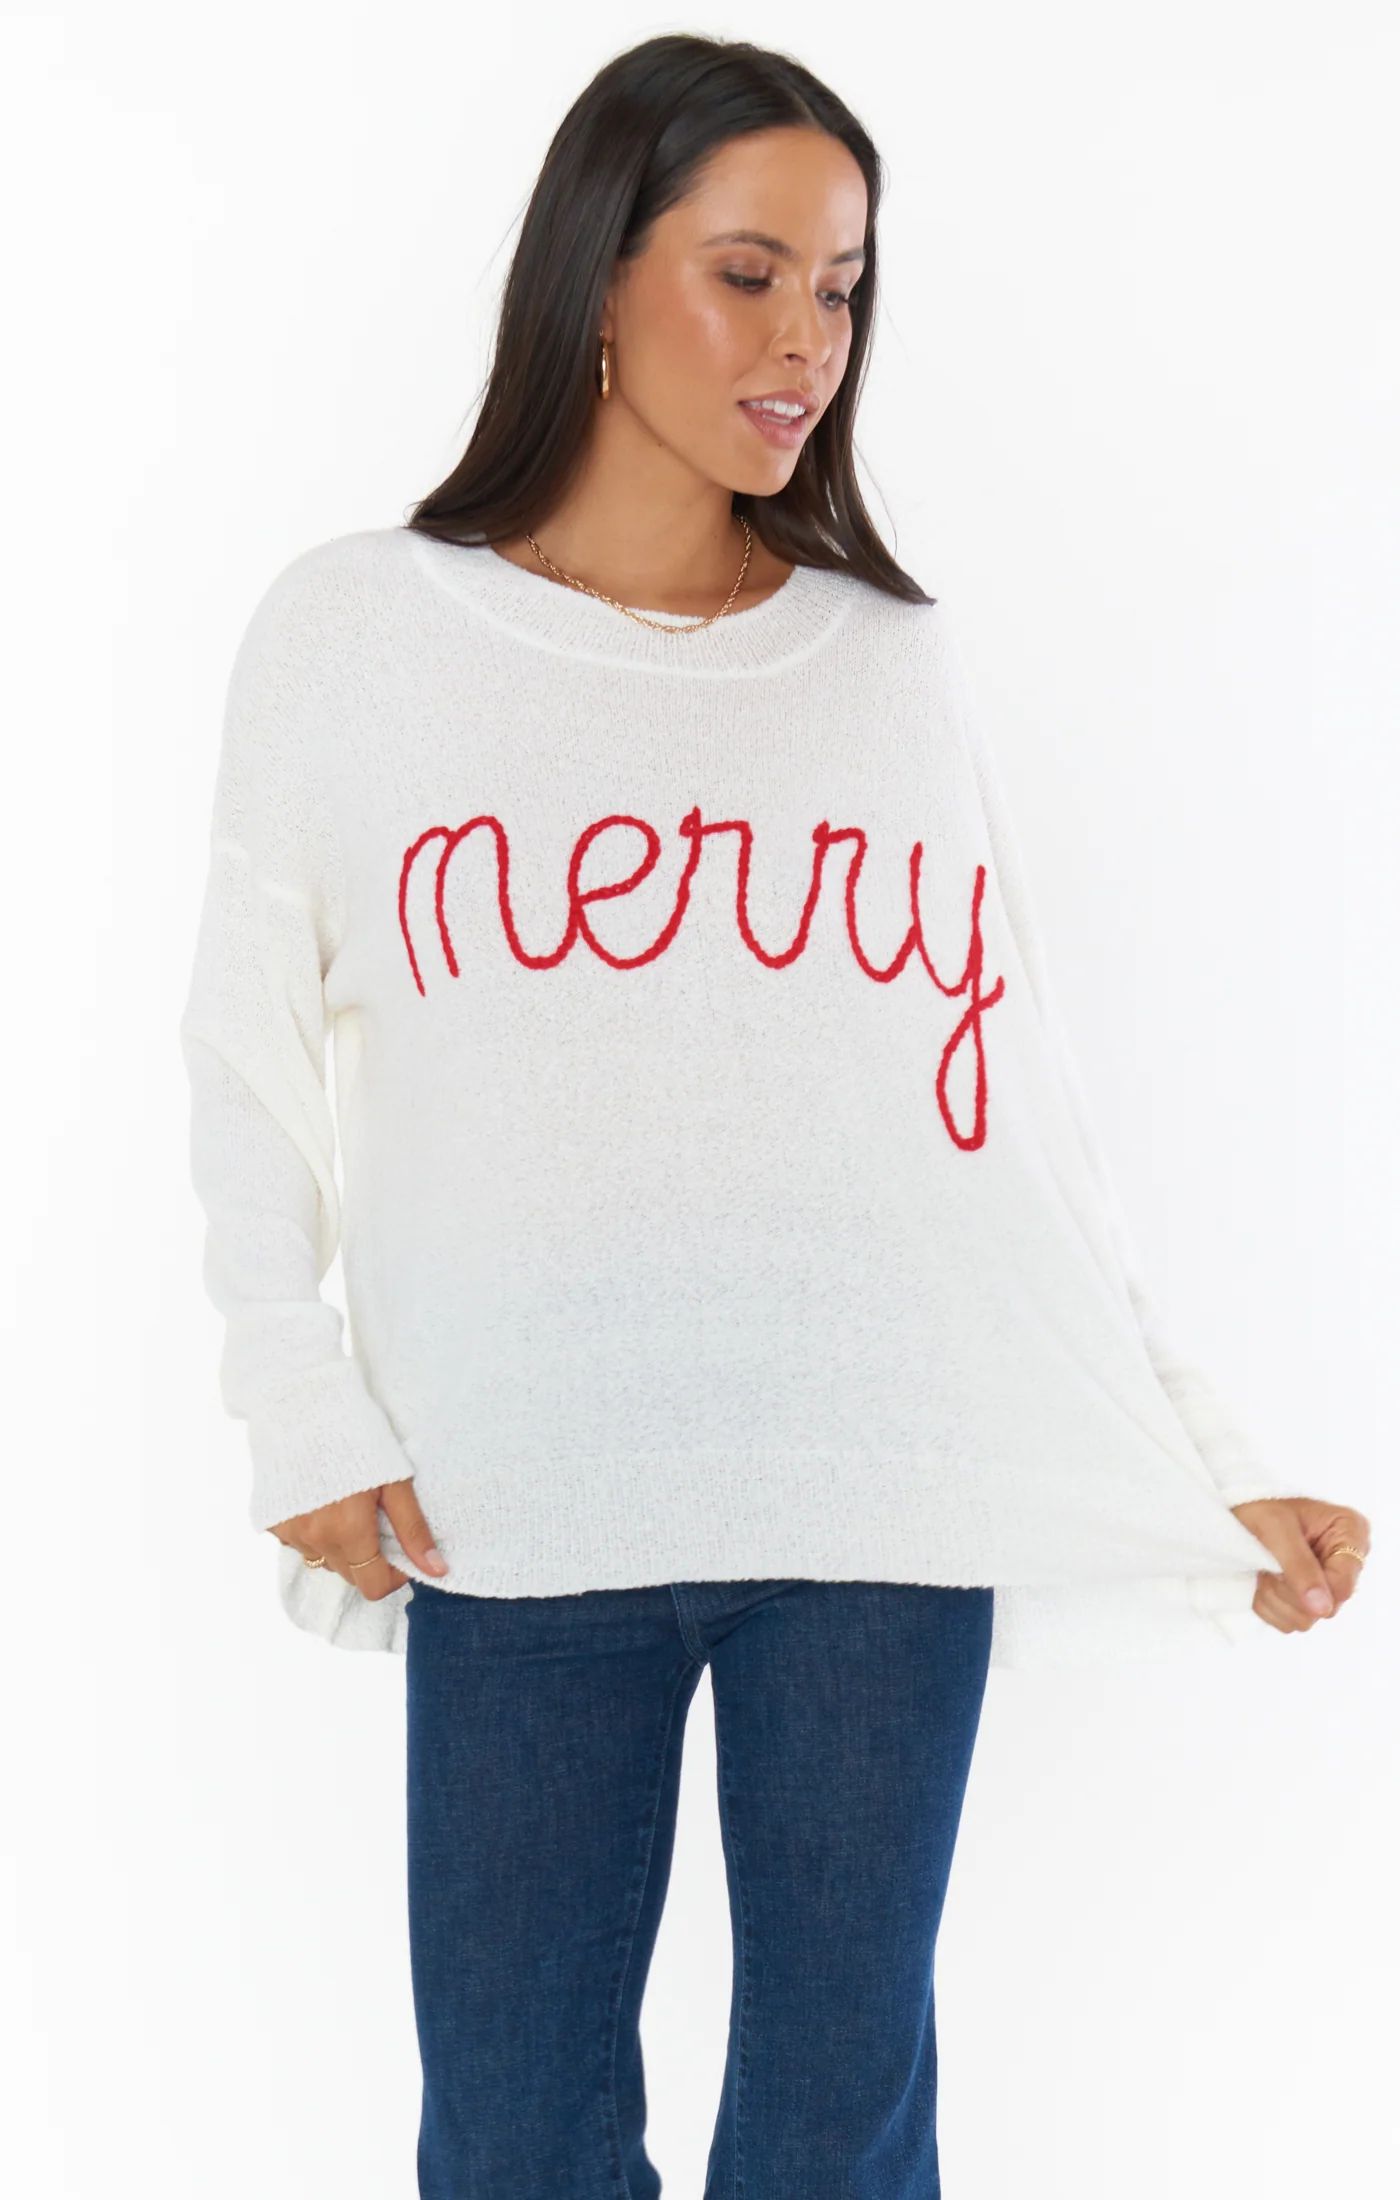 Woodsy Sweater ~ Merry Knit | Show Me Your Mumu